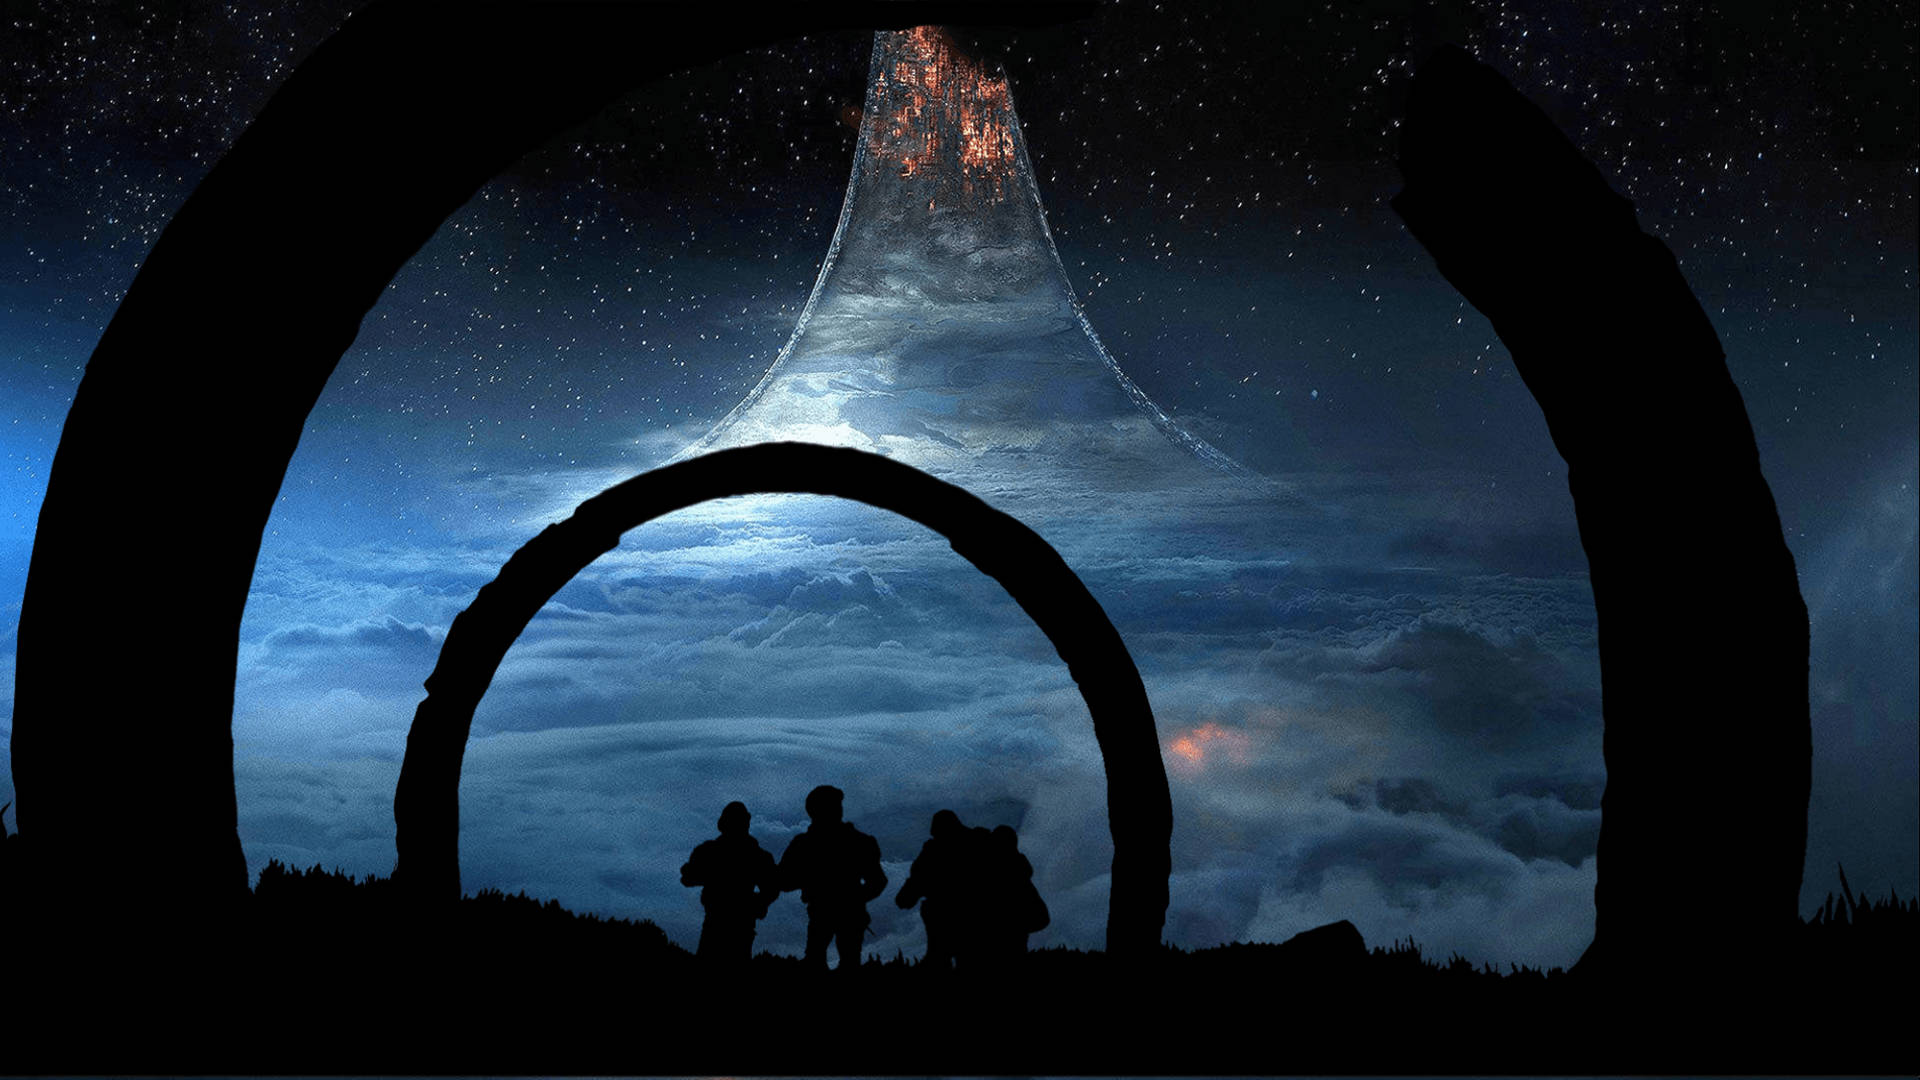 1920X1080 Halo Infinite Wallpaper and Background